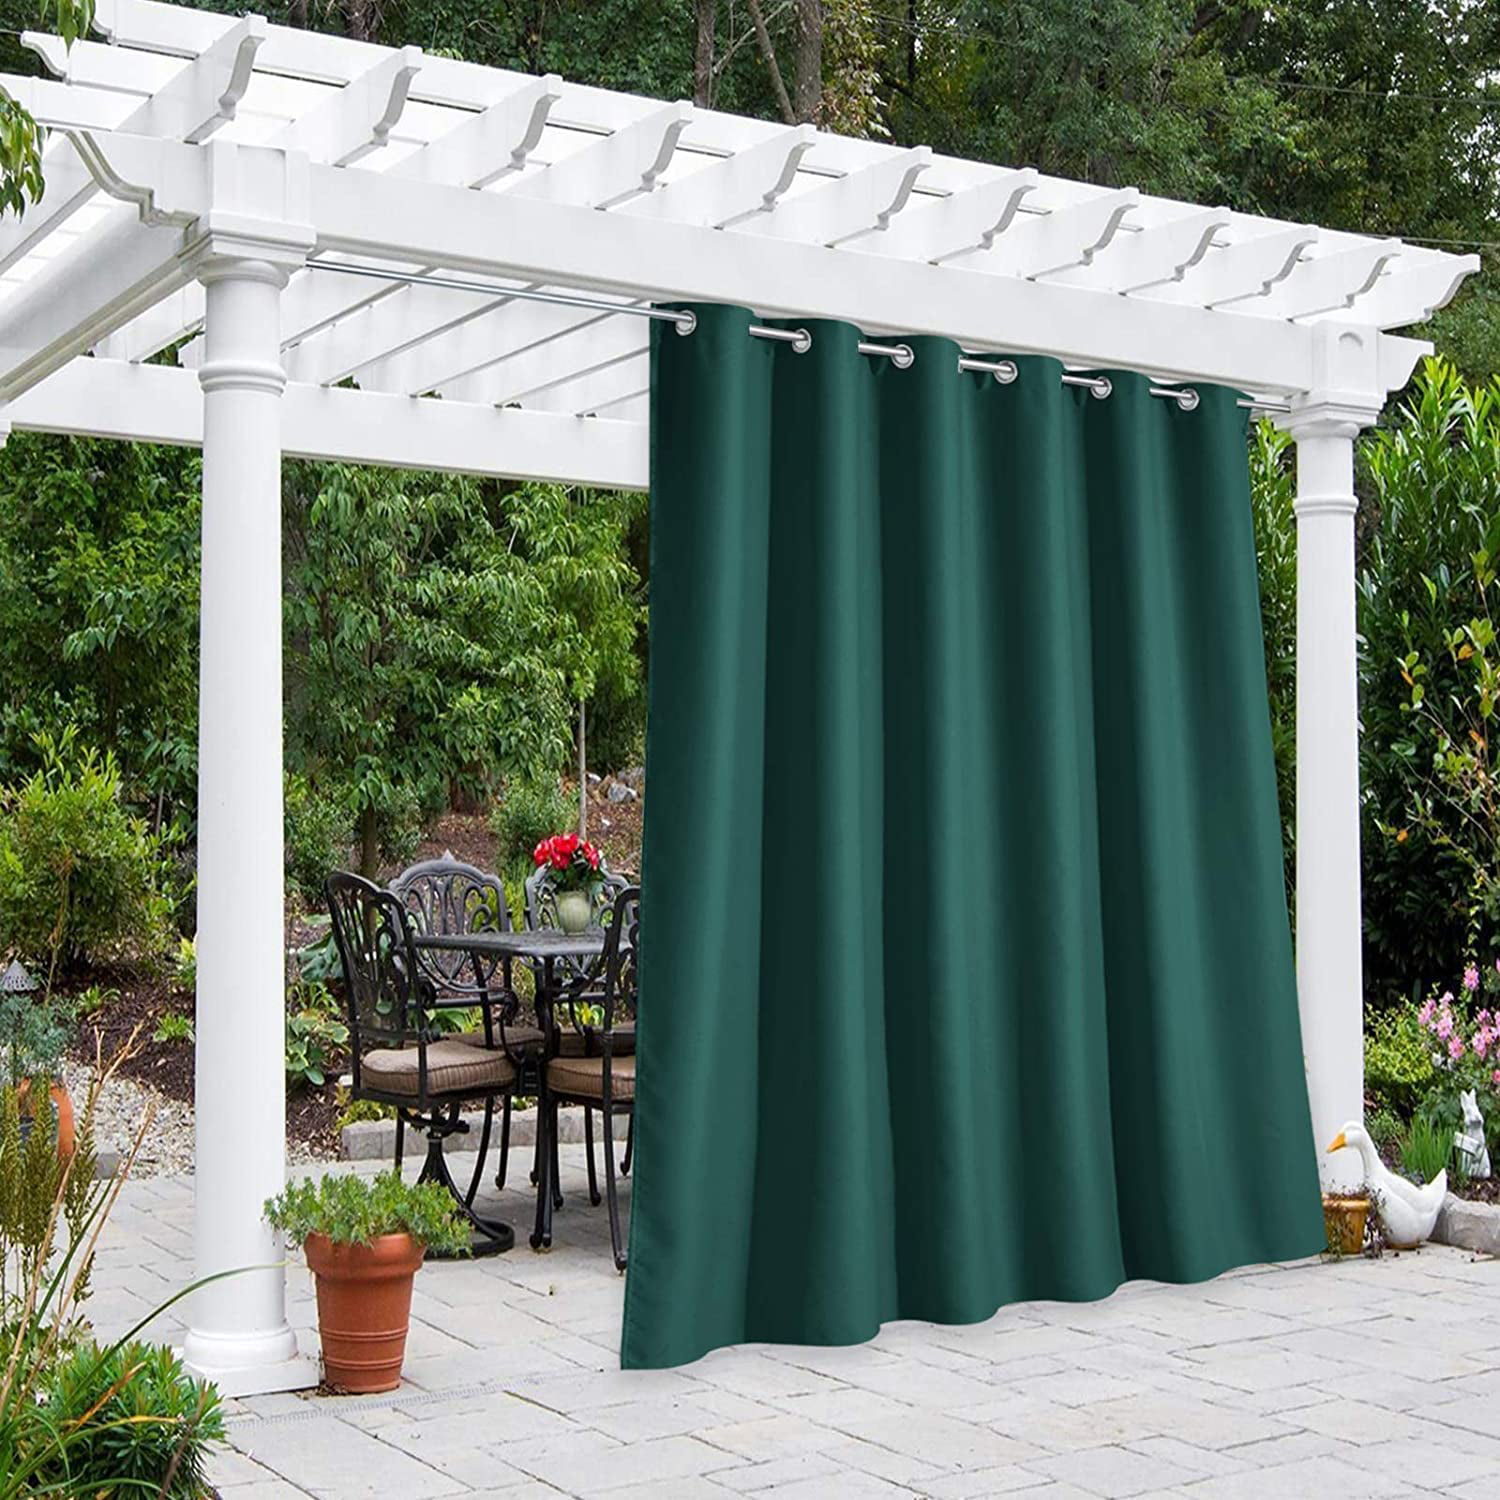 Blackout Thermal Curtains Eyelet Ring Top Outdoor Garden Patio Waterproof Panels 